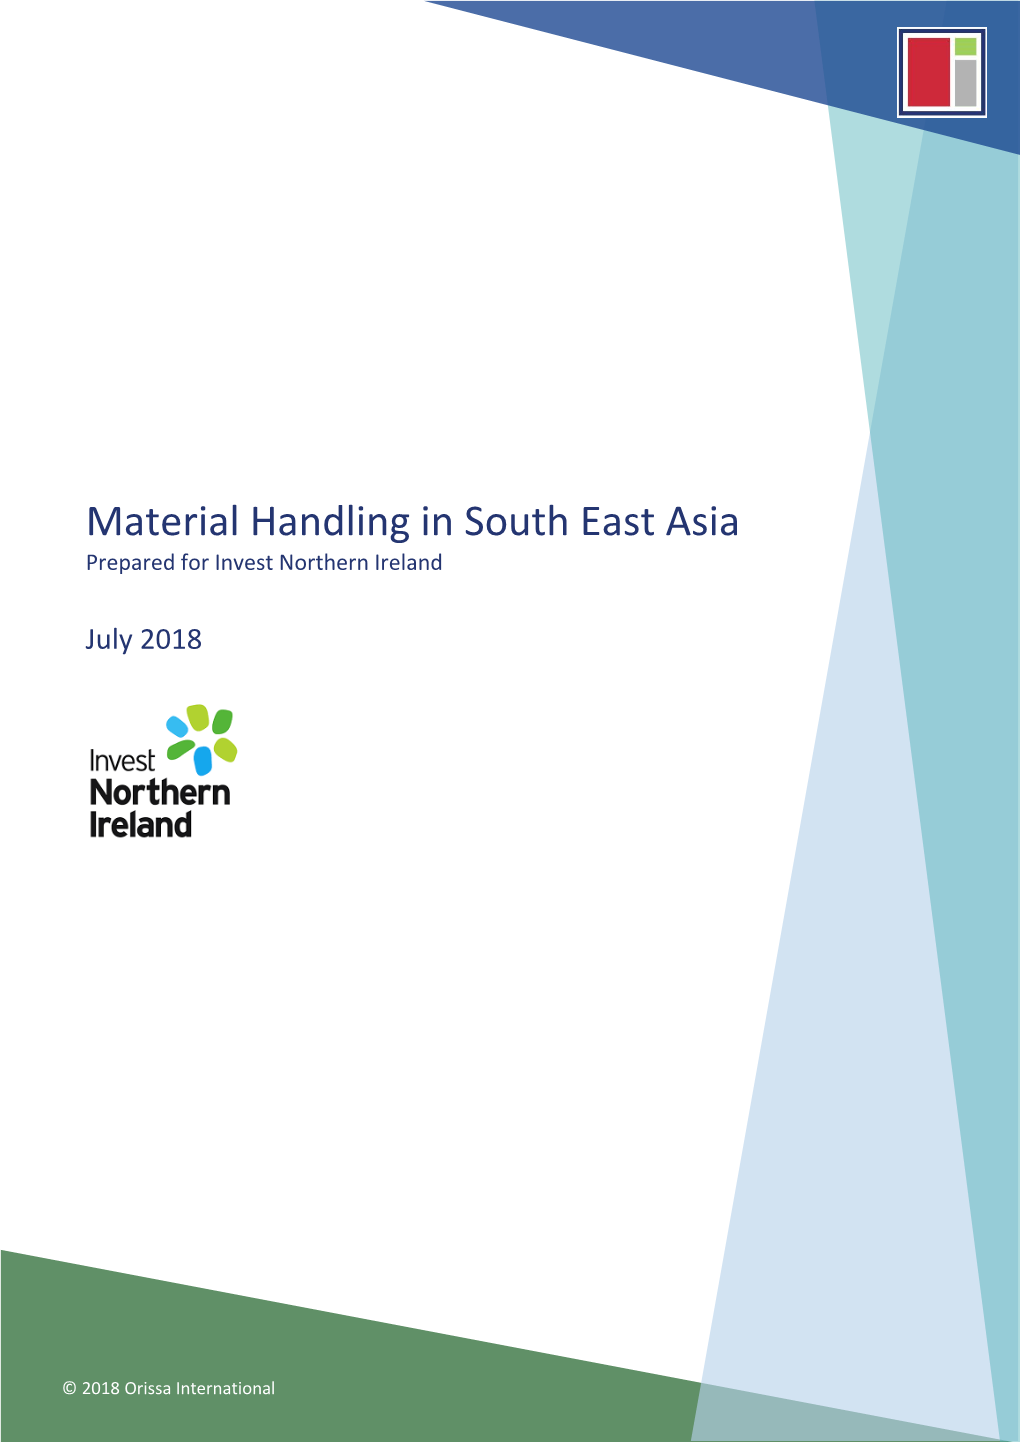 The Material Handling Sector in South East Asia